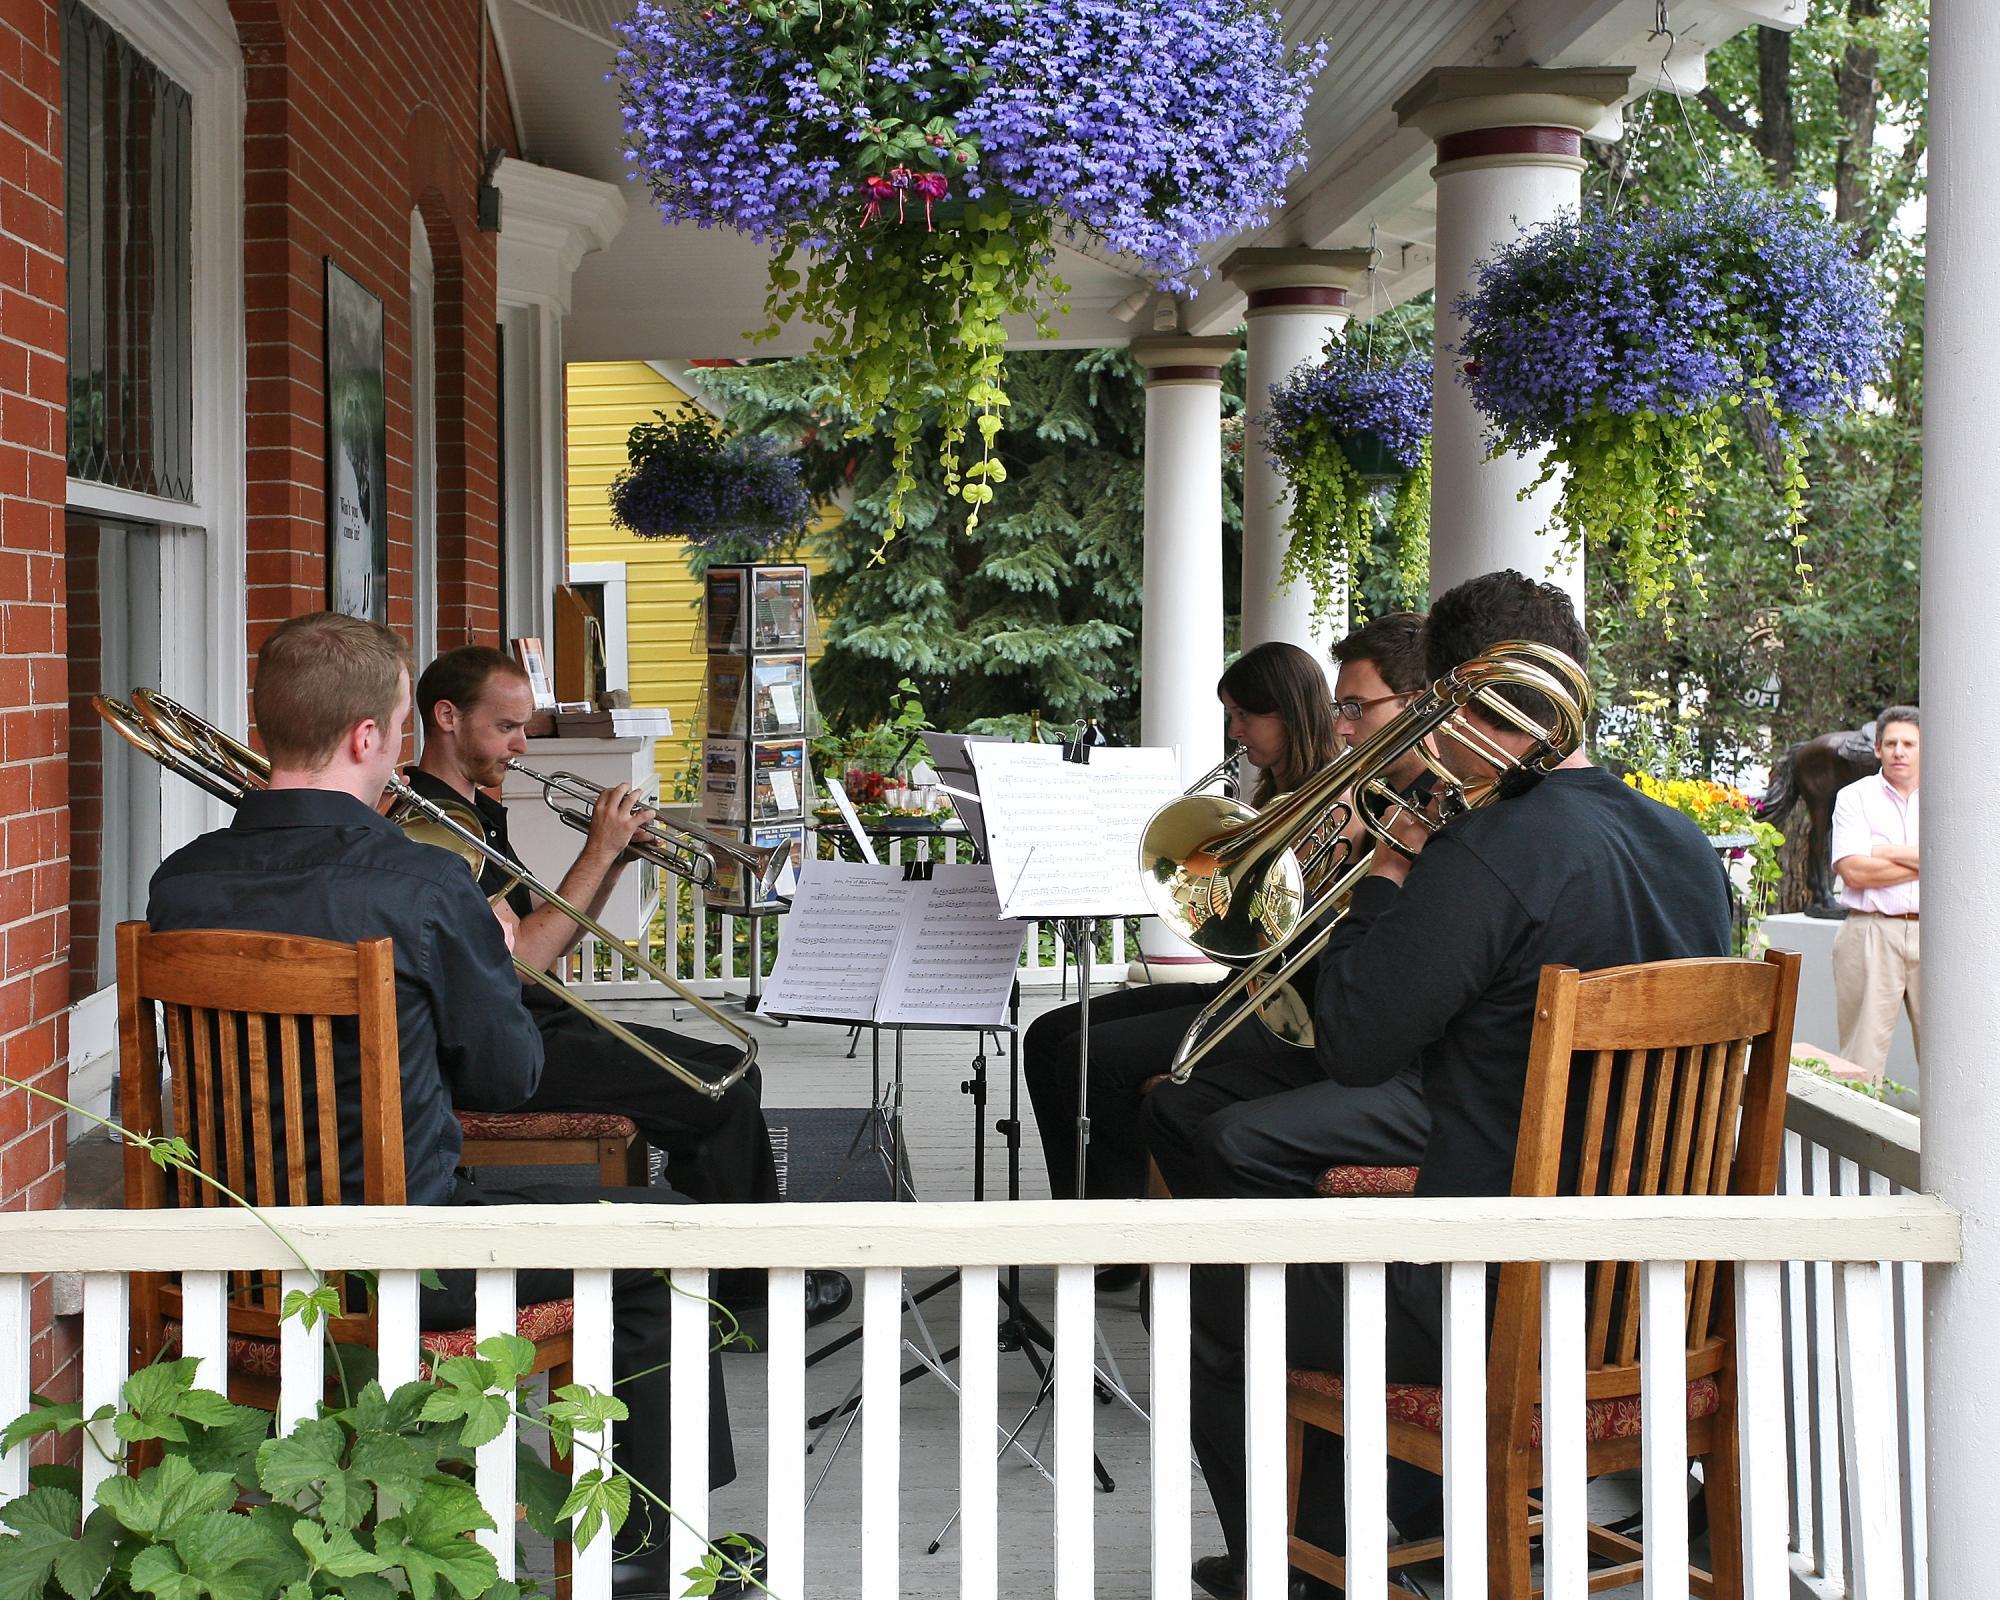 Breck Associates hosts a series of concerts on the porch of their Main Street office